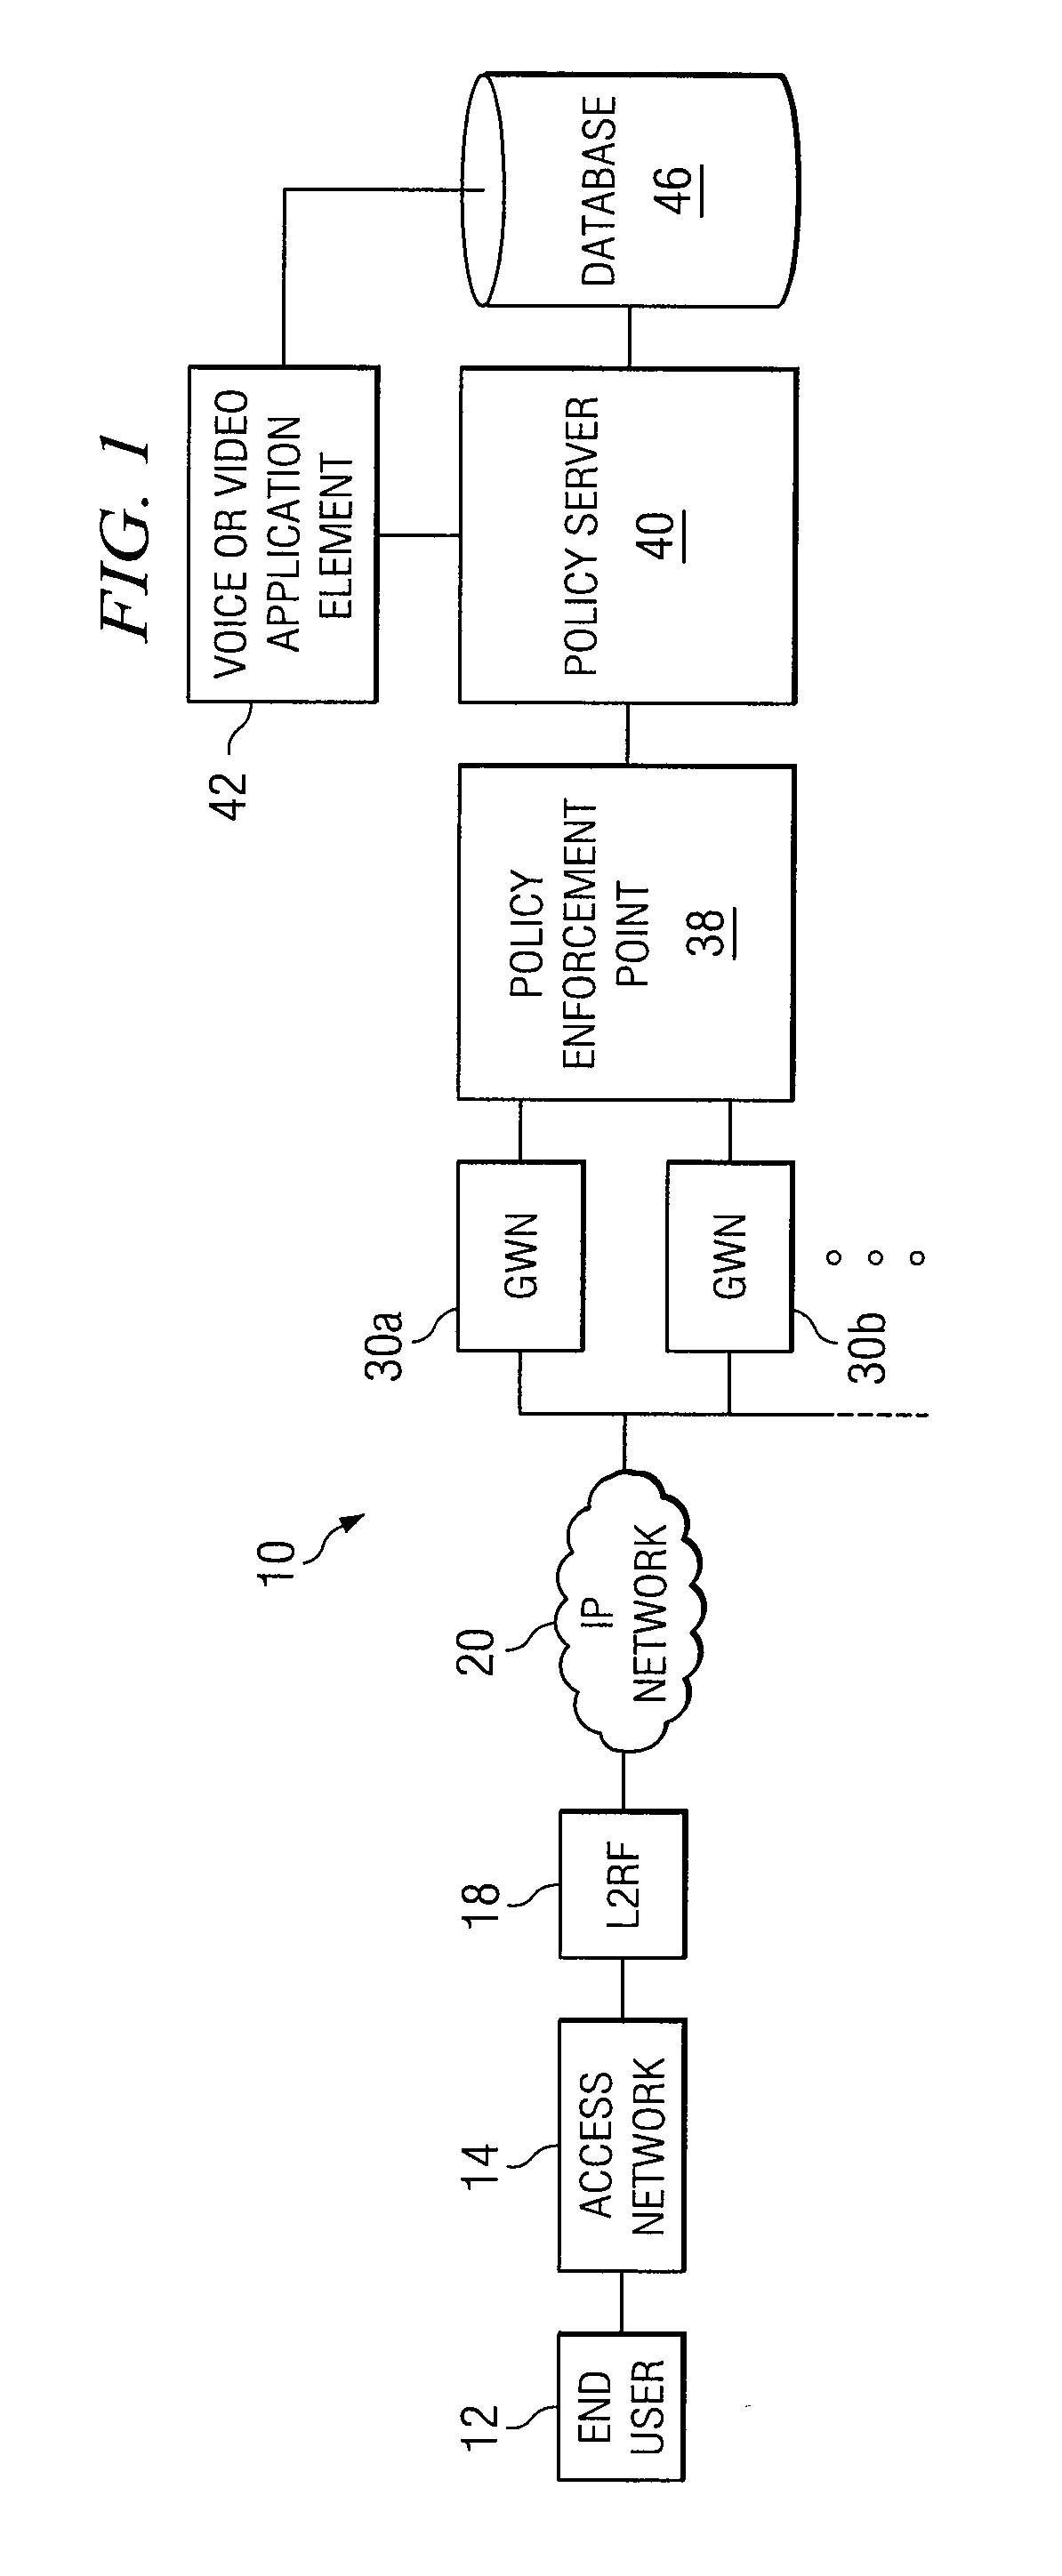 System and Method for Providing Application-Specific On-Line Charging in a Communications Environment